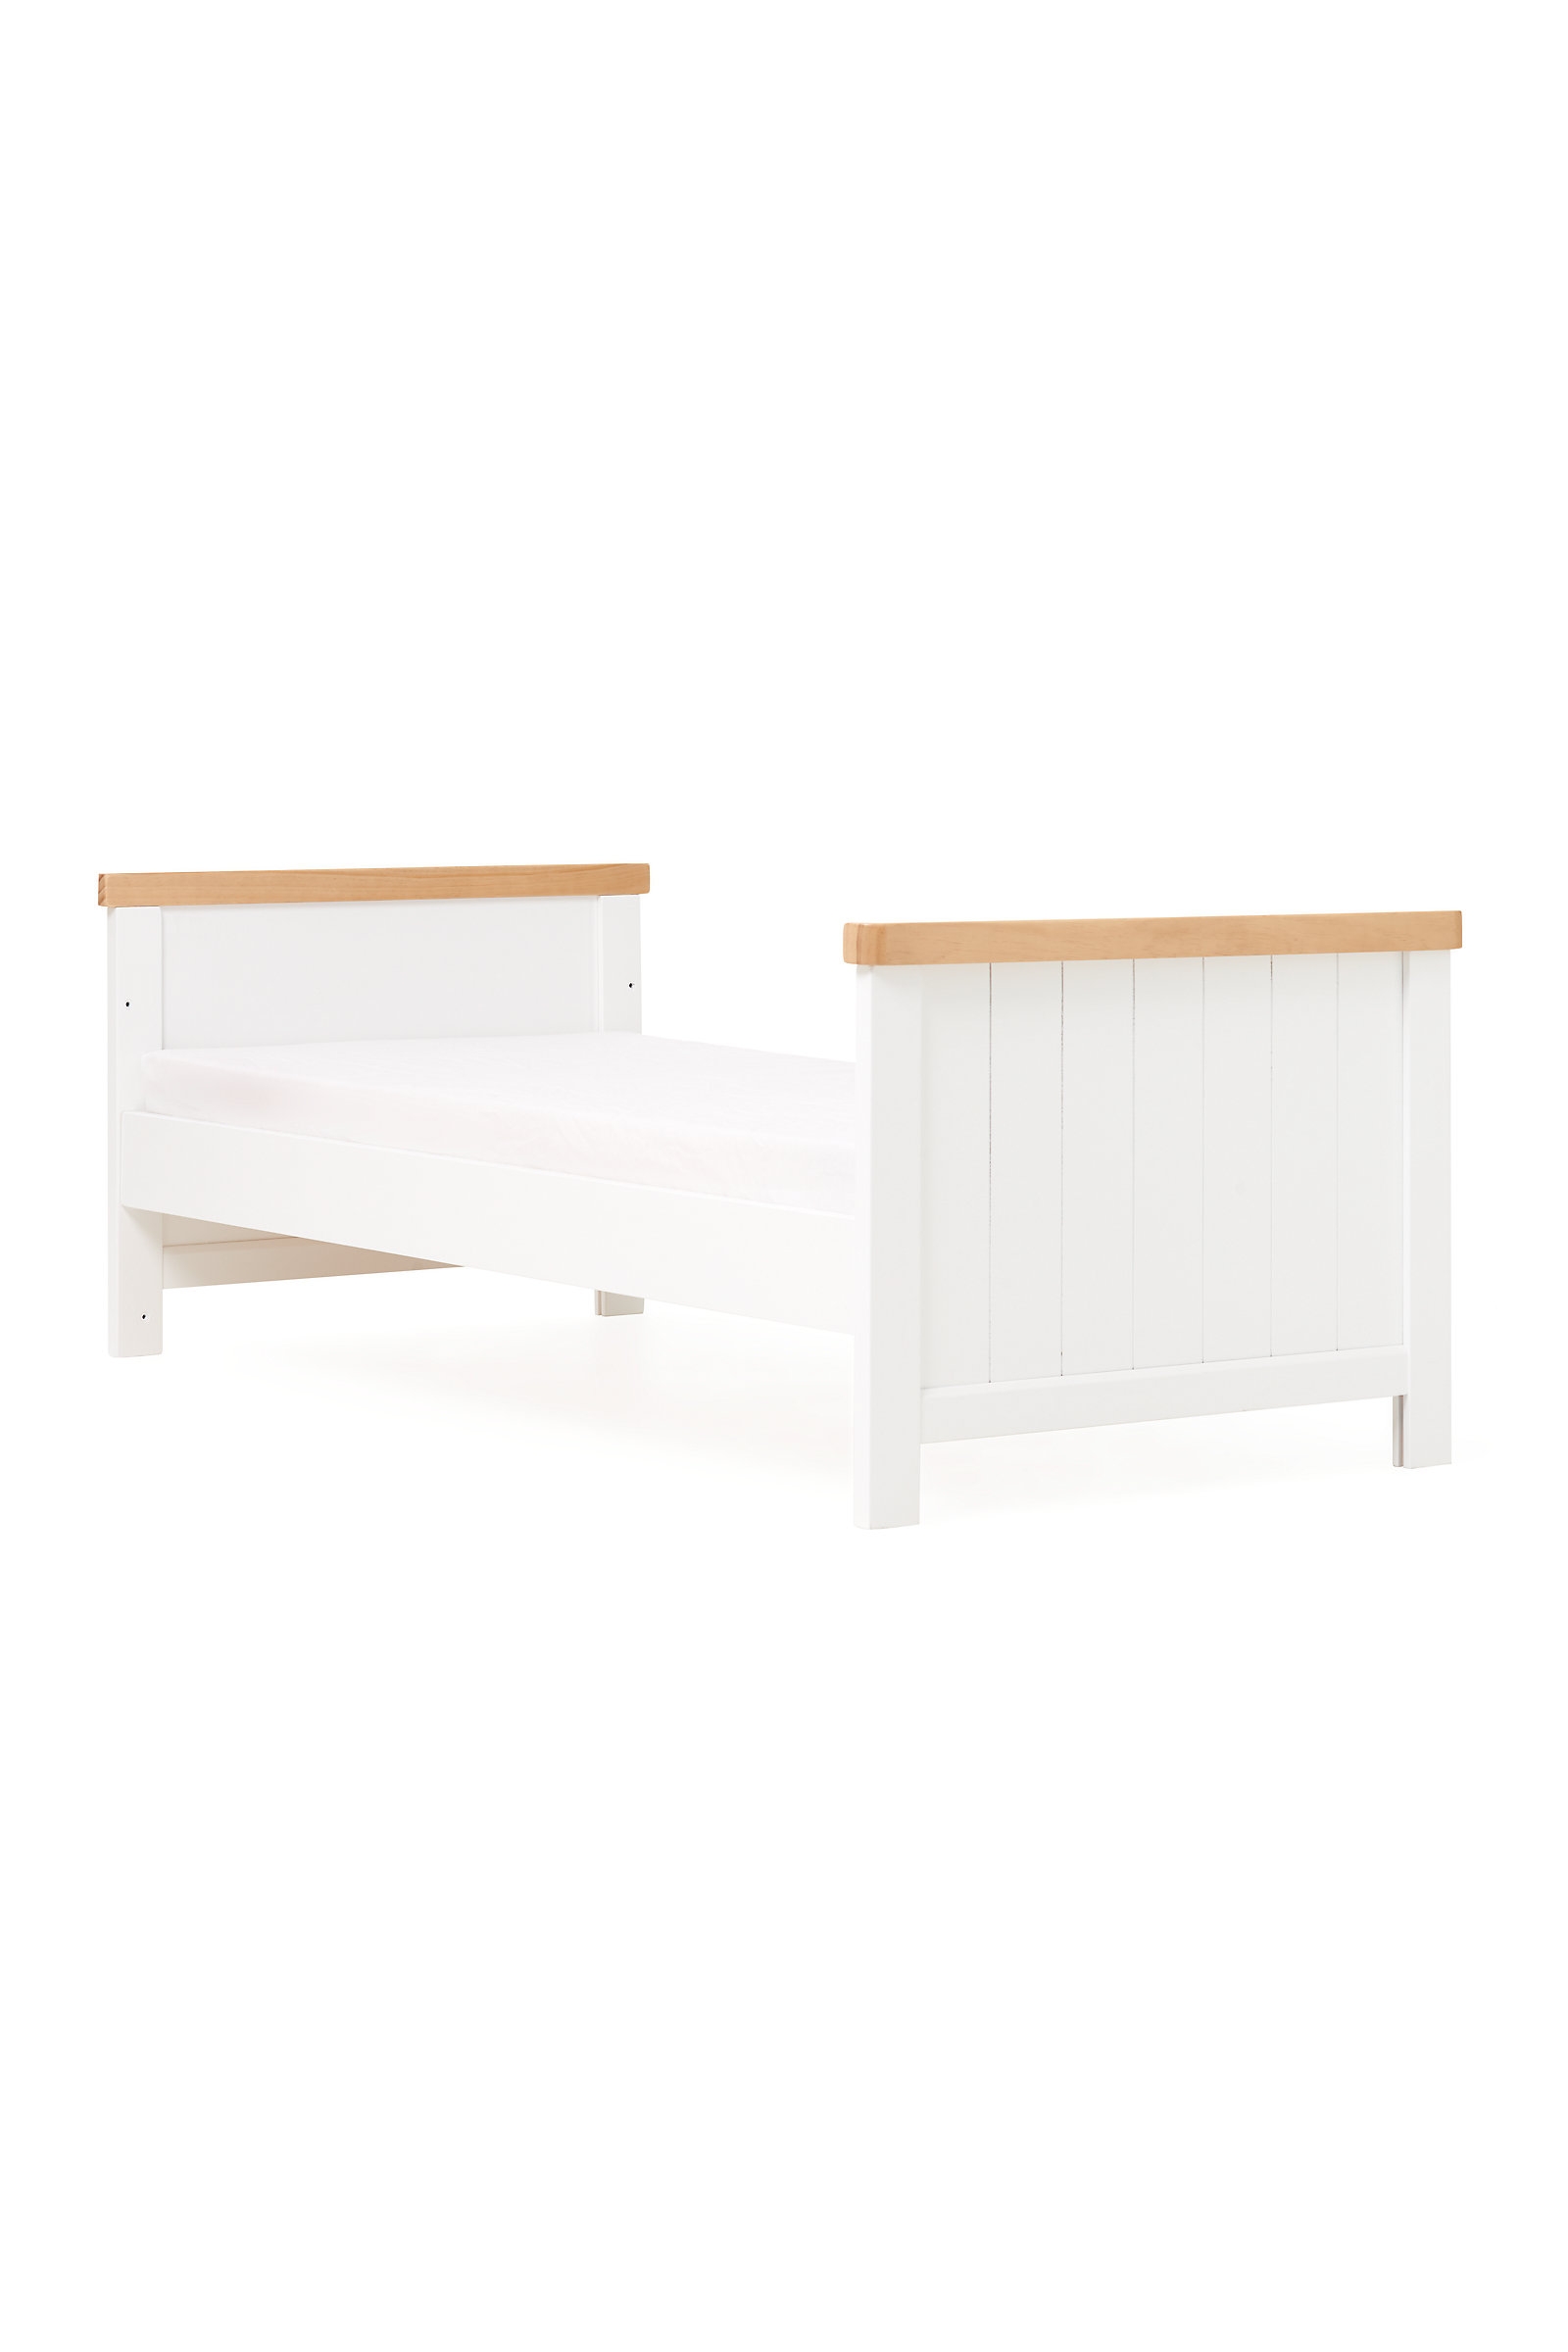 Mothercare Lulworth Cot Bed Classic White